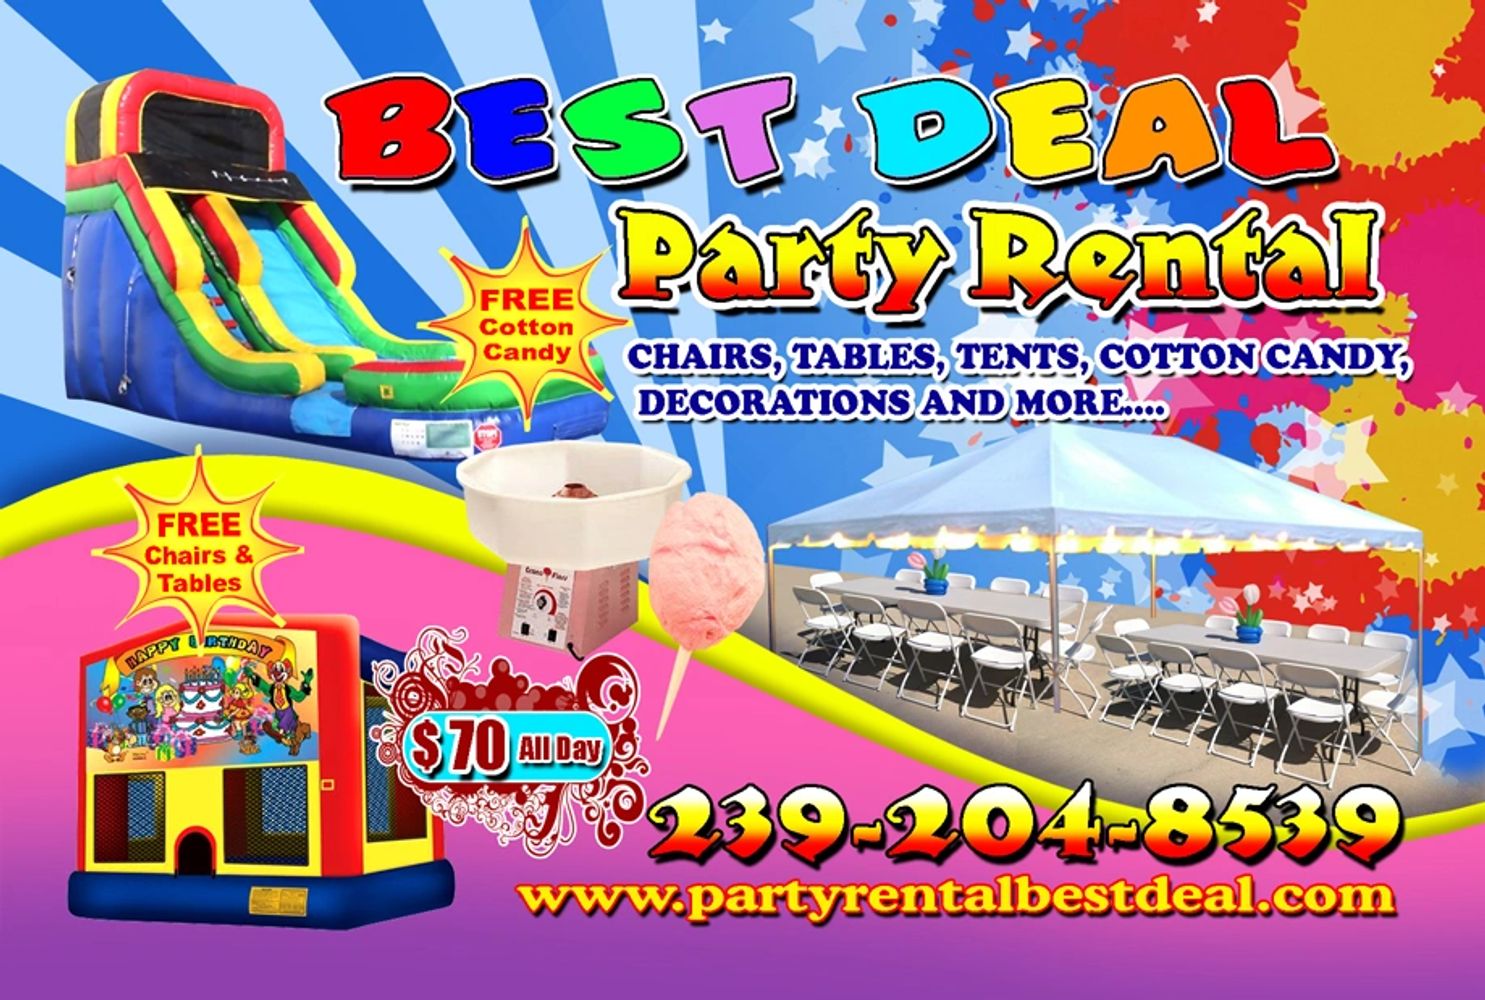 Party packages at an affordable rate - AFFORDABLE PARTY RENTAL & SUPPLY